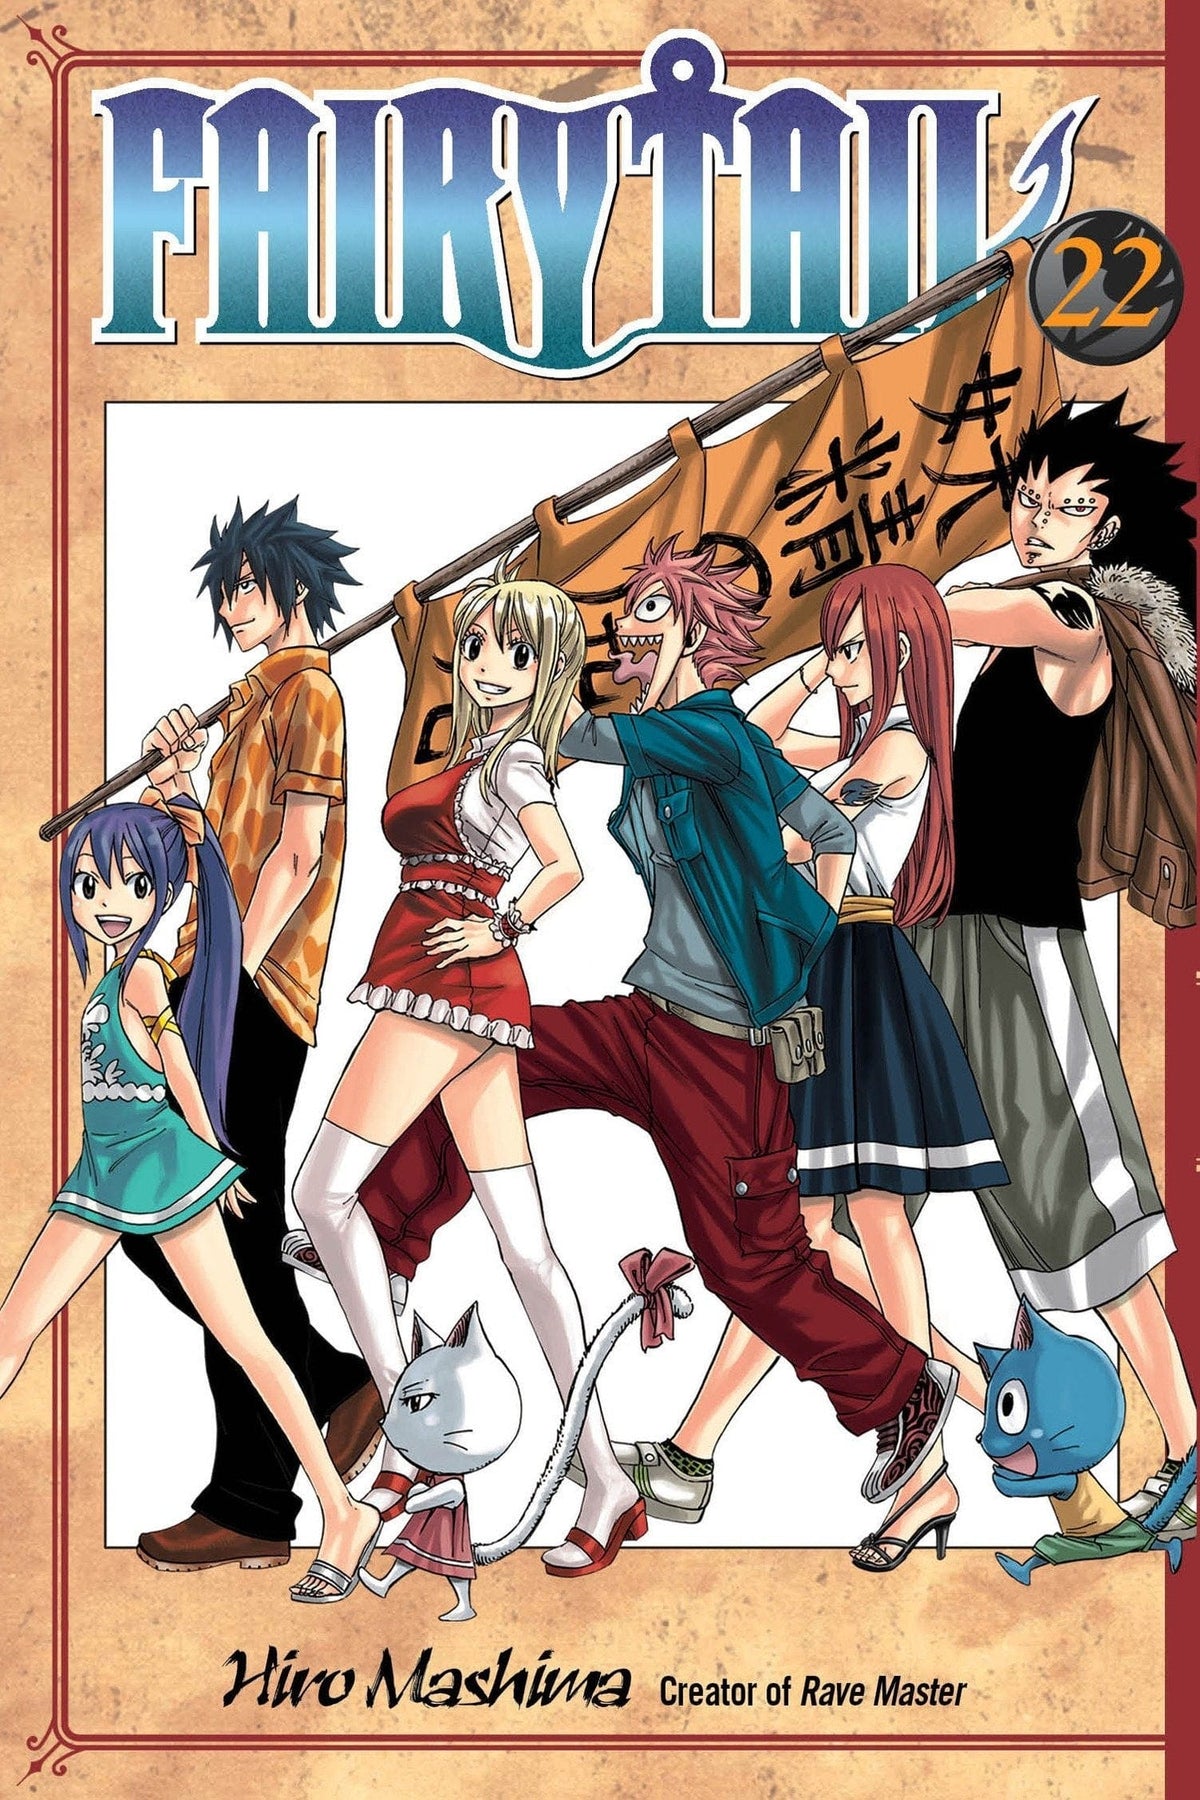 Heroes of Fairy Tail, Board Game